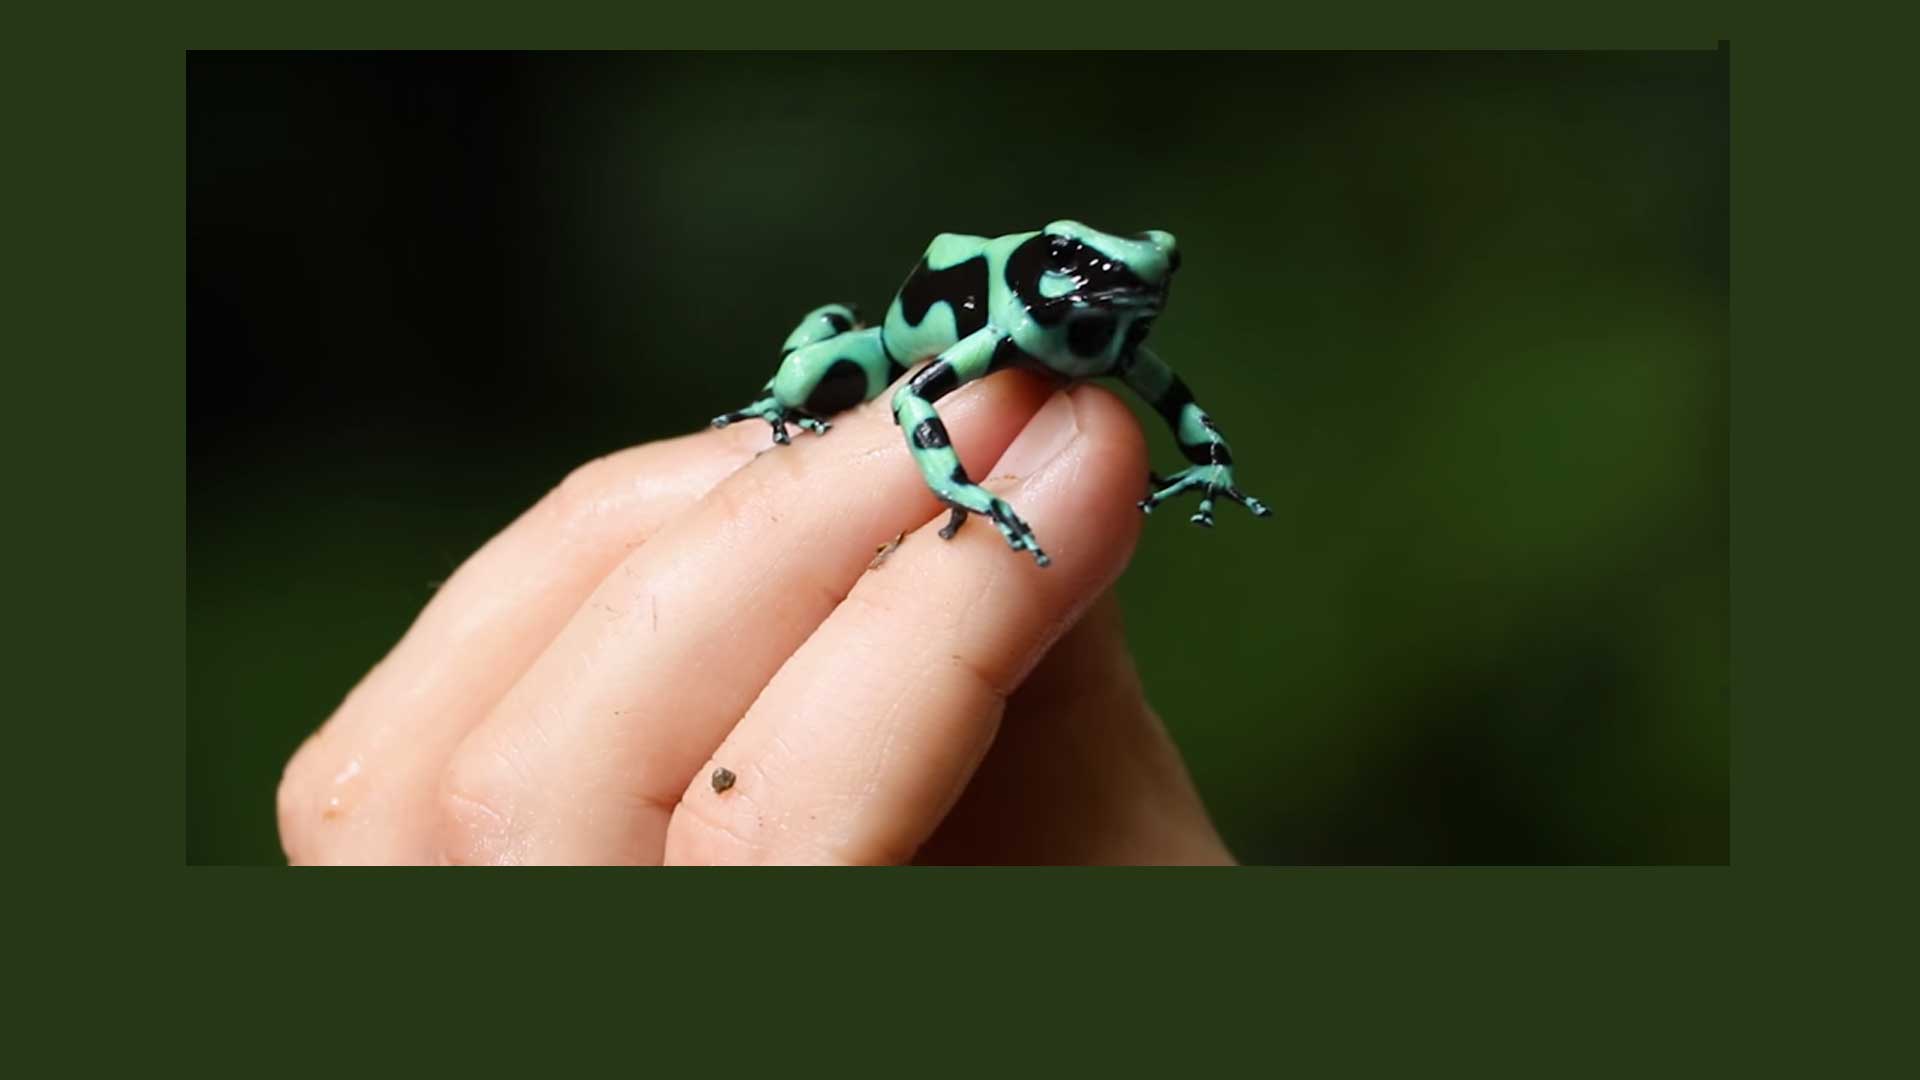 Poisonous Frogs